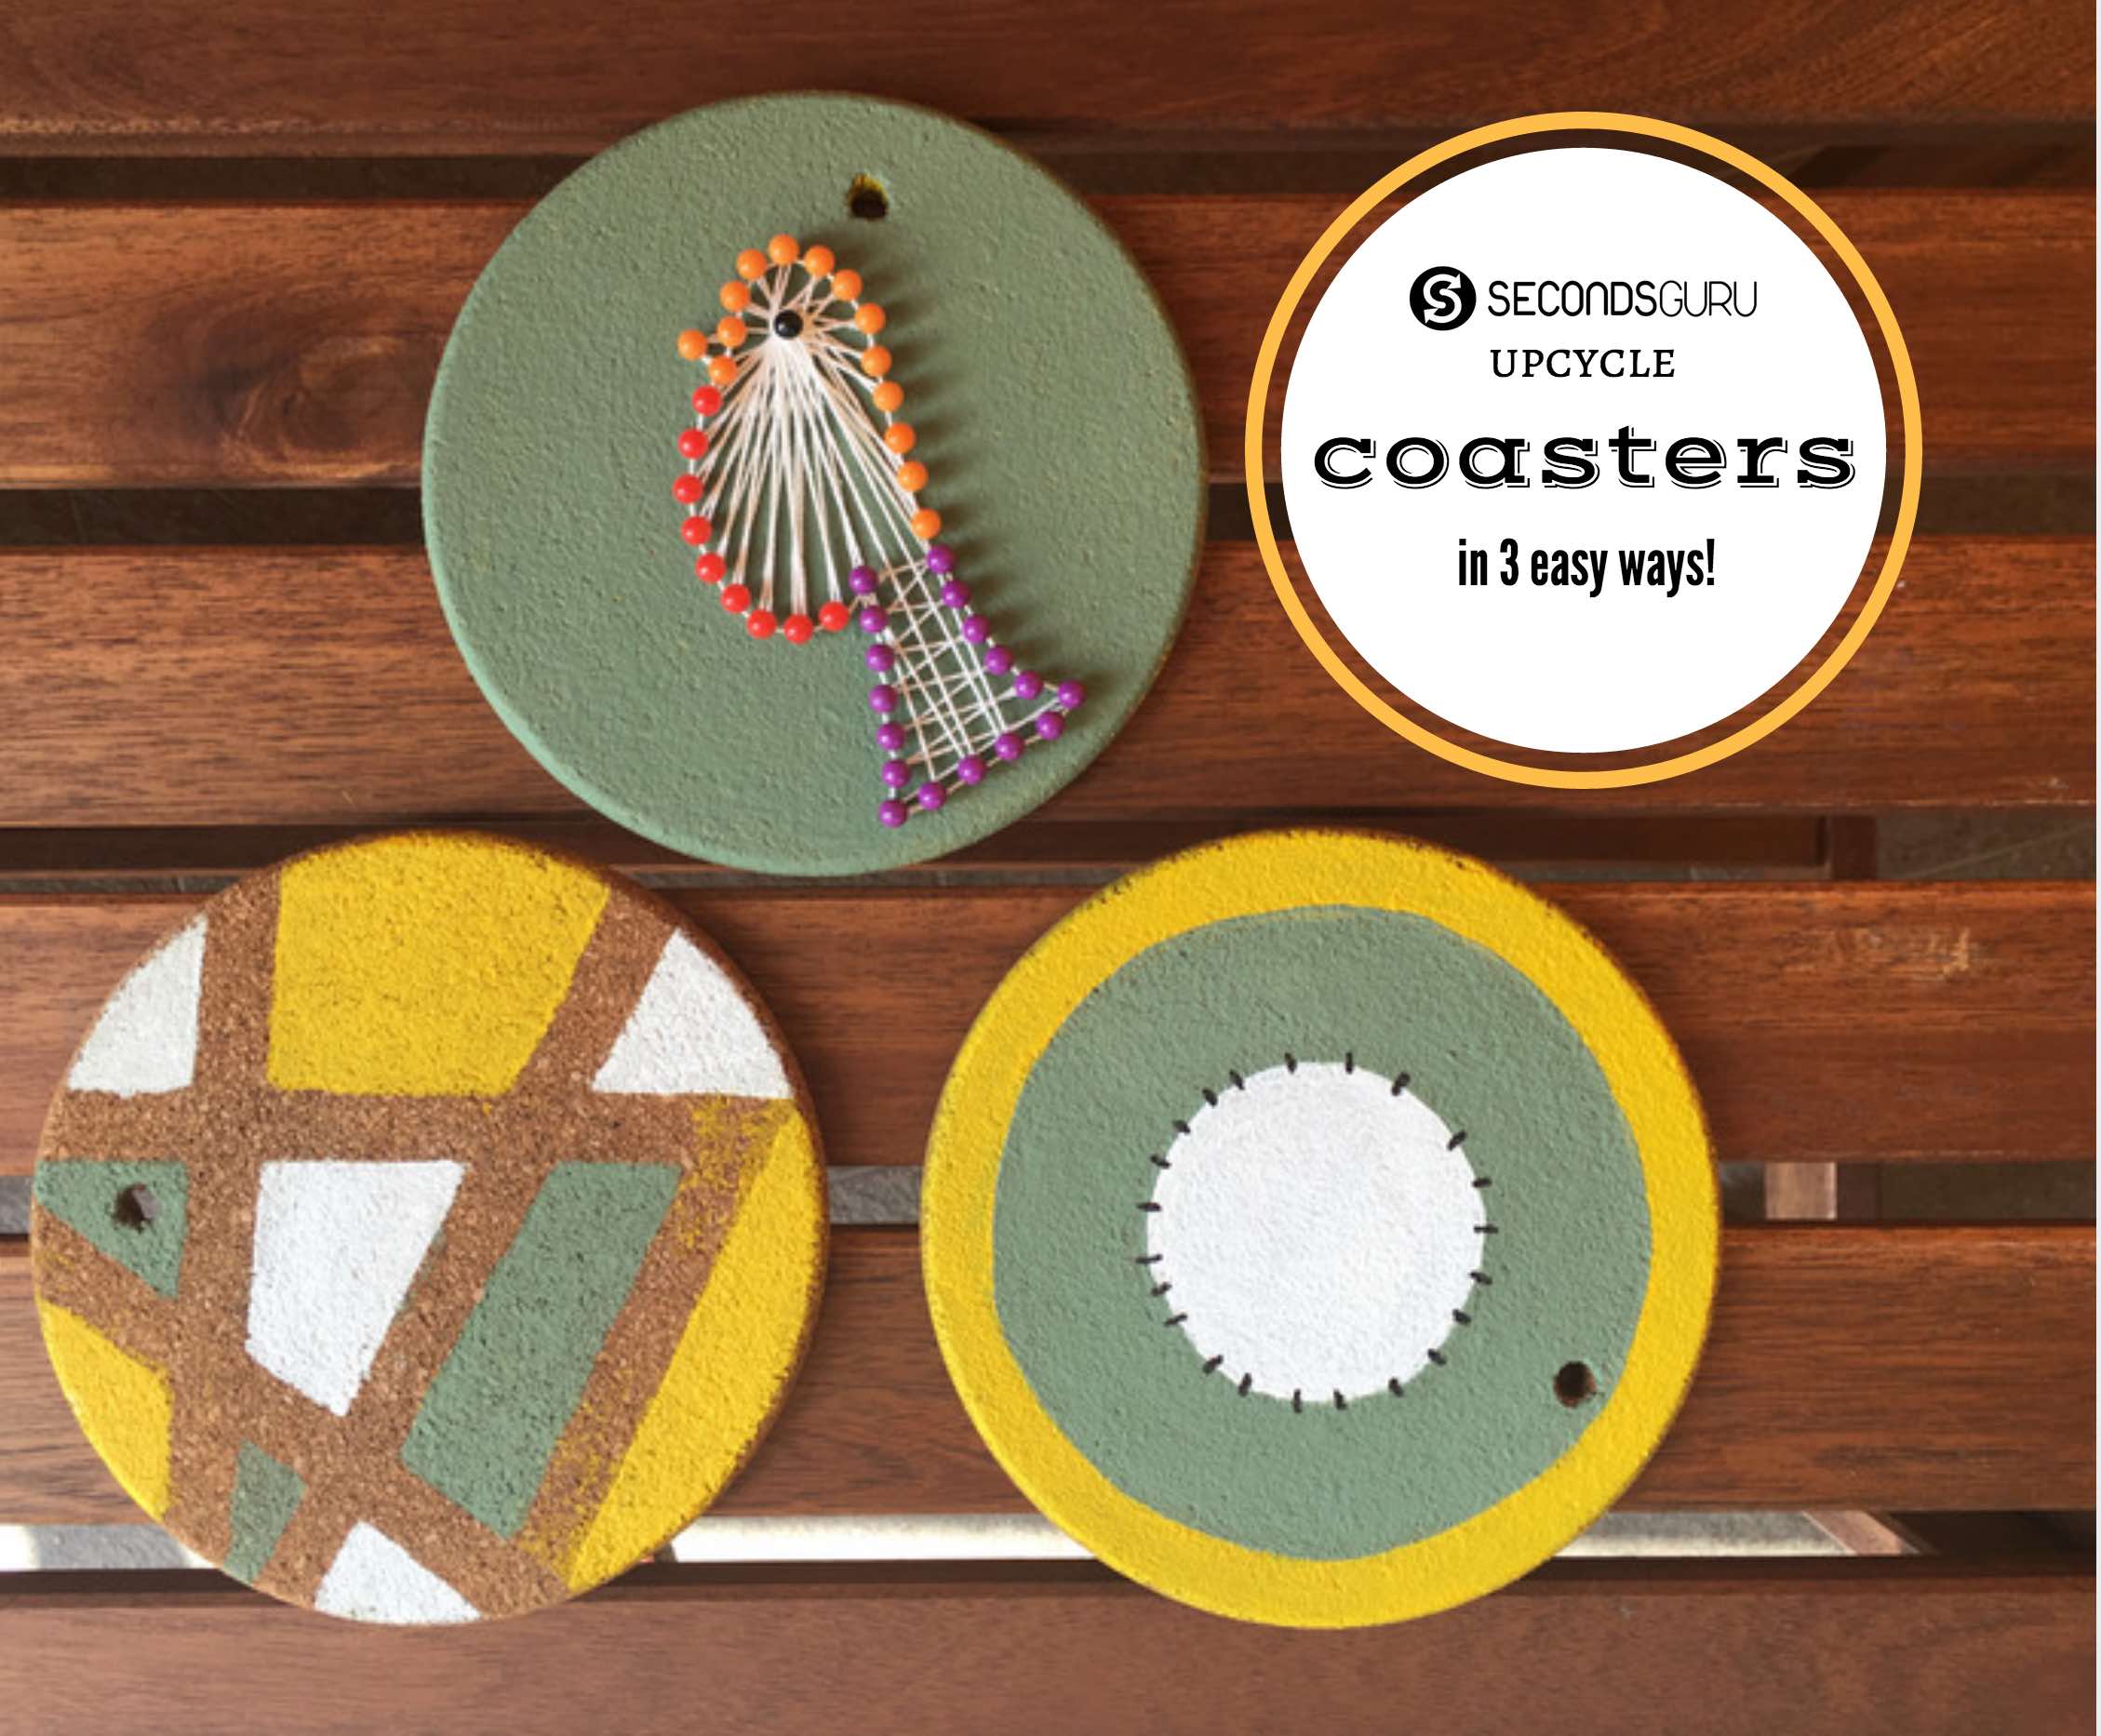 upcycle coasters with paint and thread art